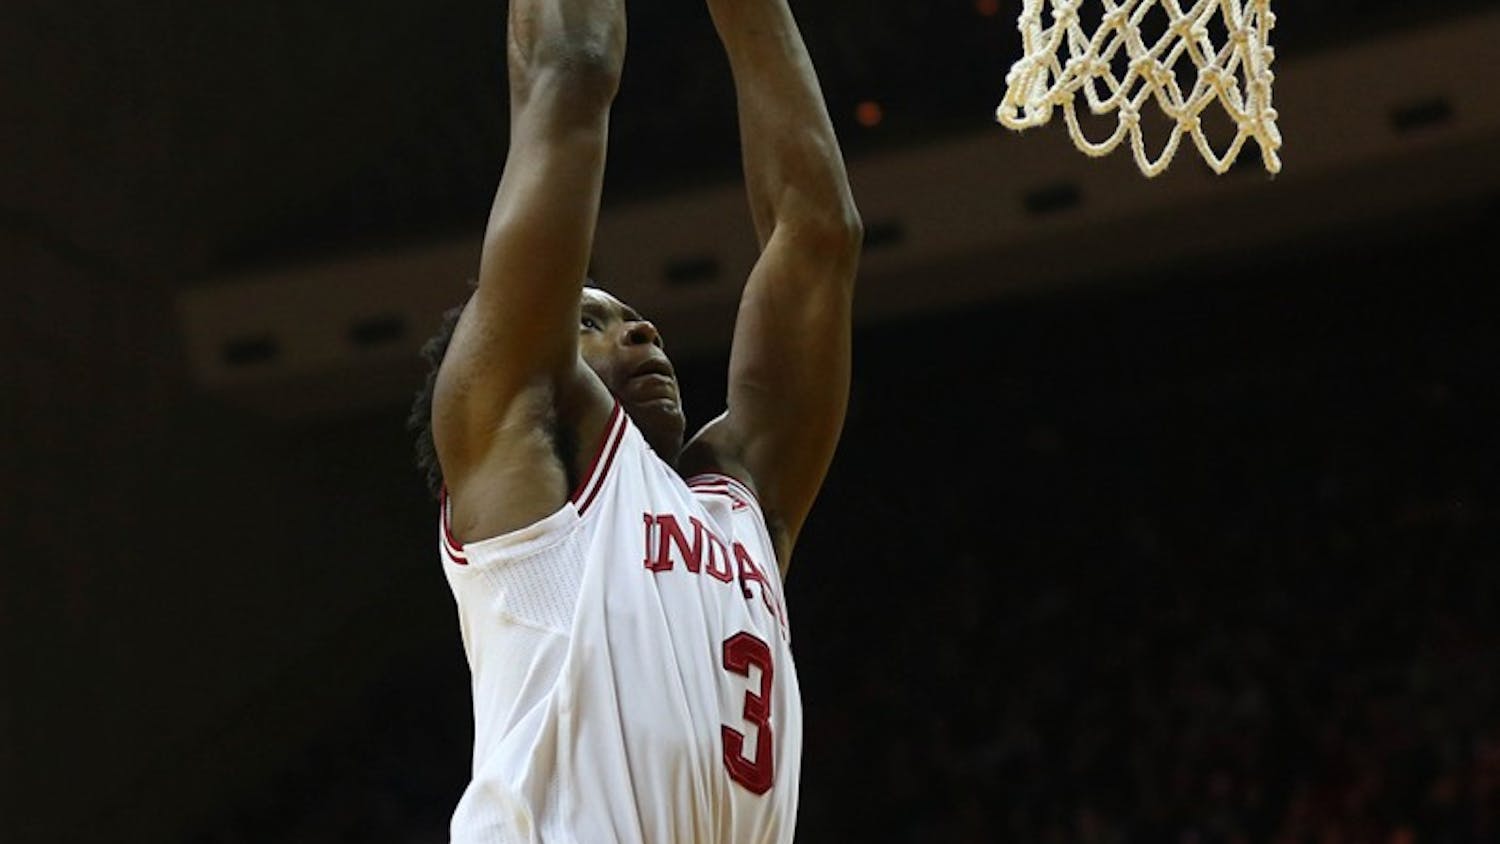 Sophomore forward OG Anunoby goes up for a dunk against Rutgers on January 15, 2017. OG Anunoby is entered into the NBA Draft that will take place on Thursday.